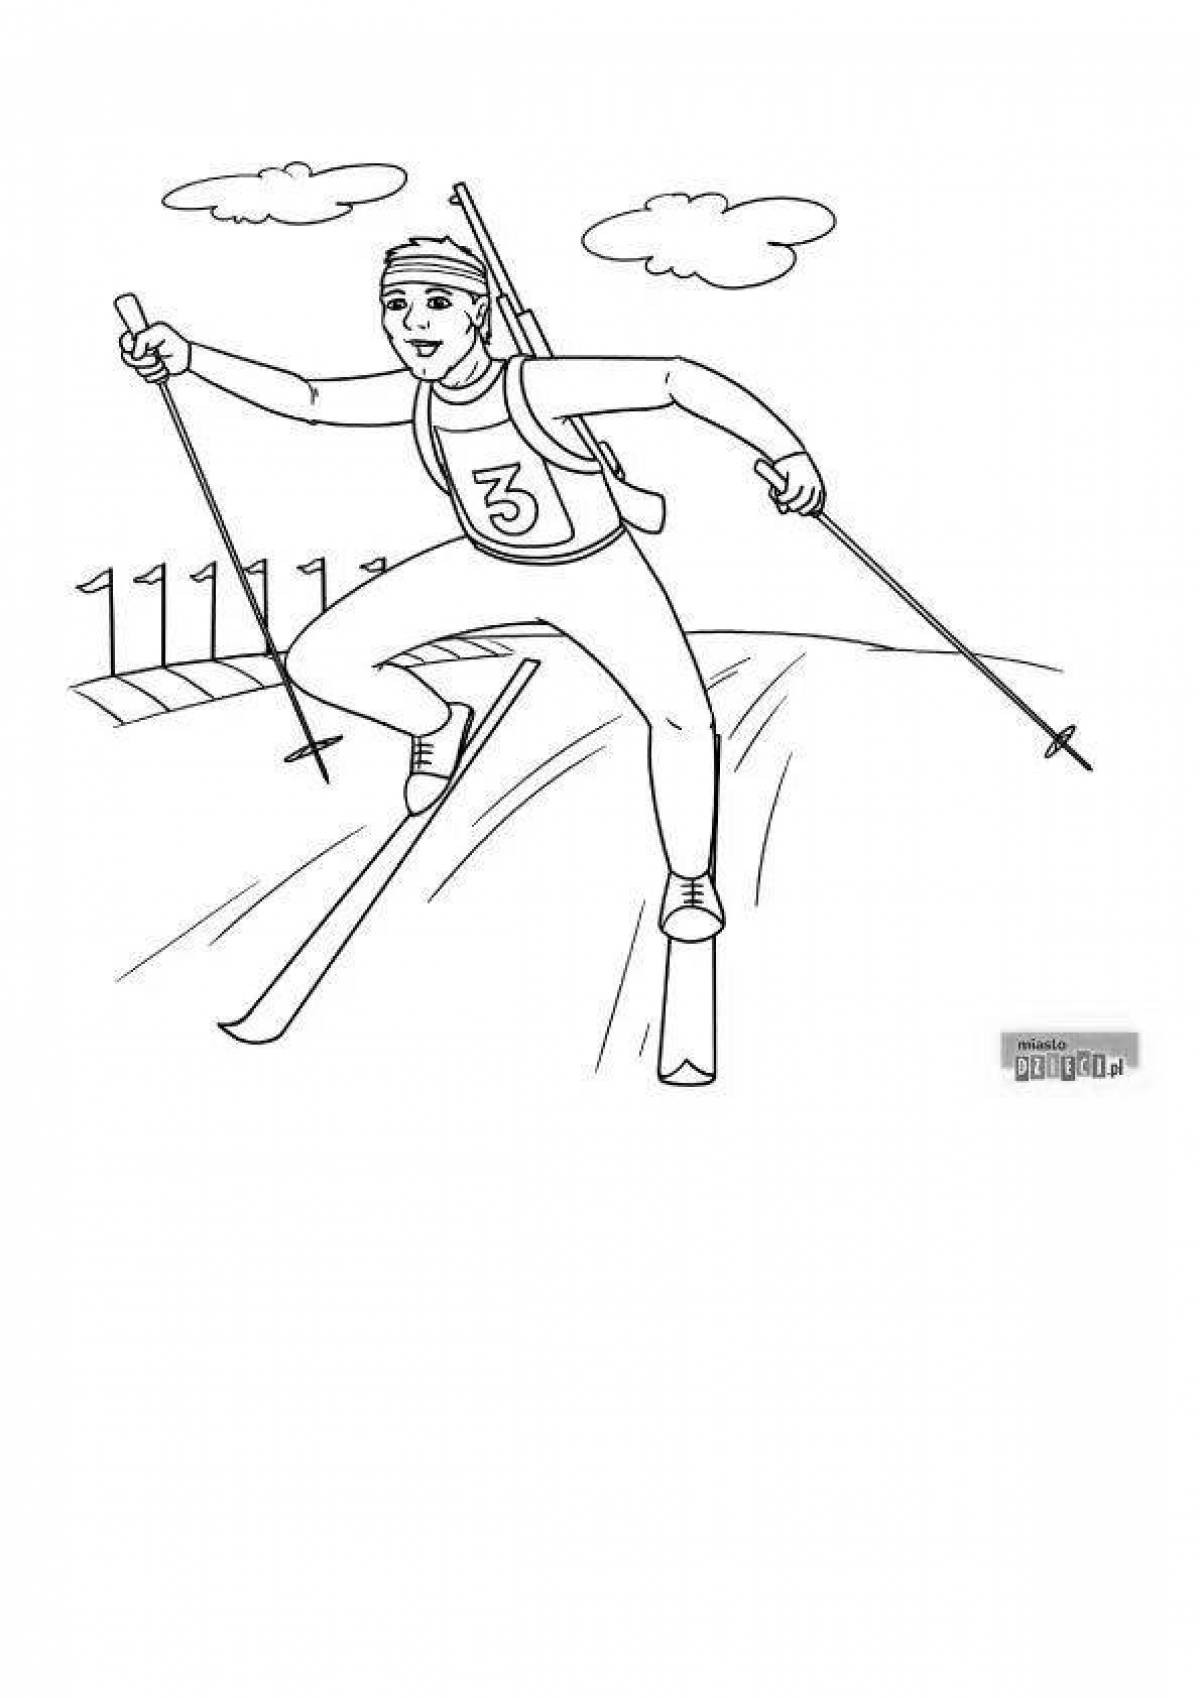 Exciting biathlon coloring book for kids